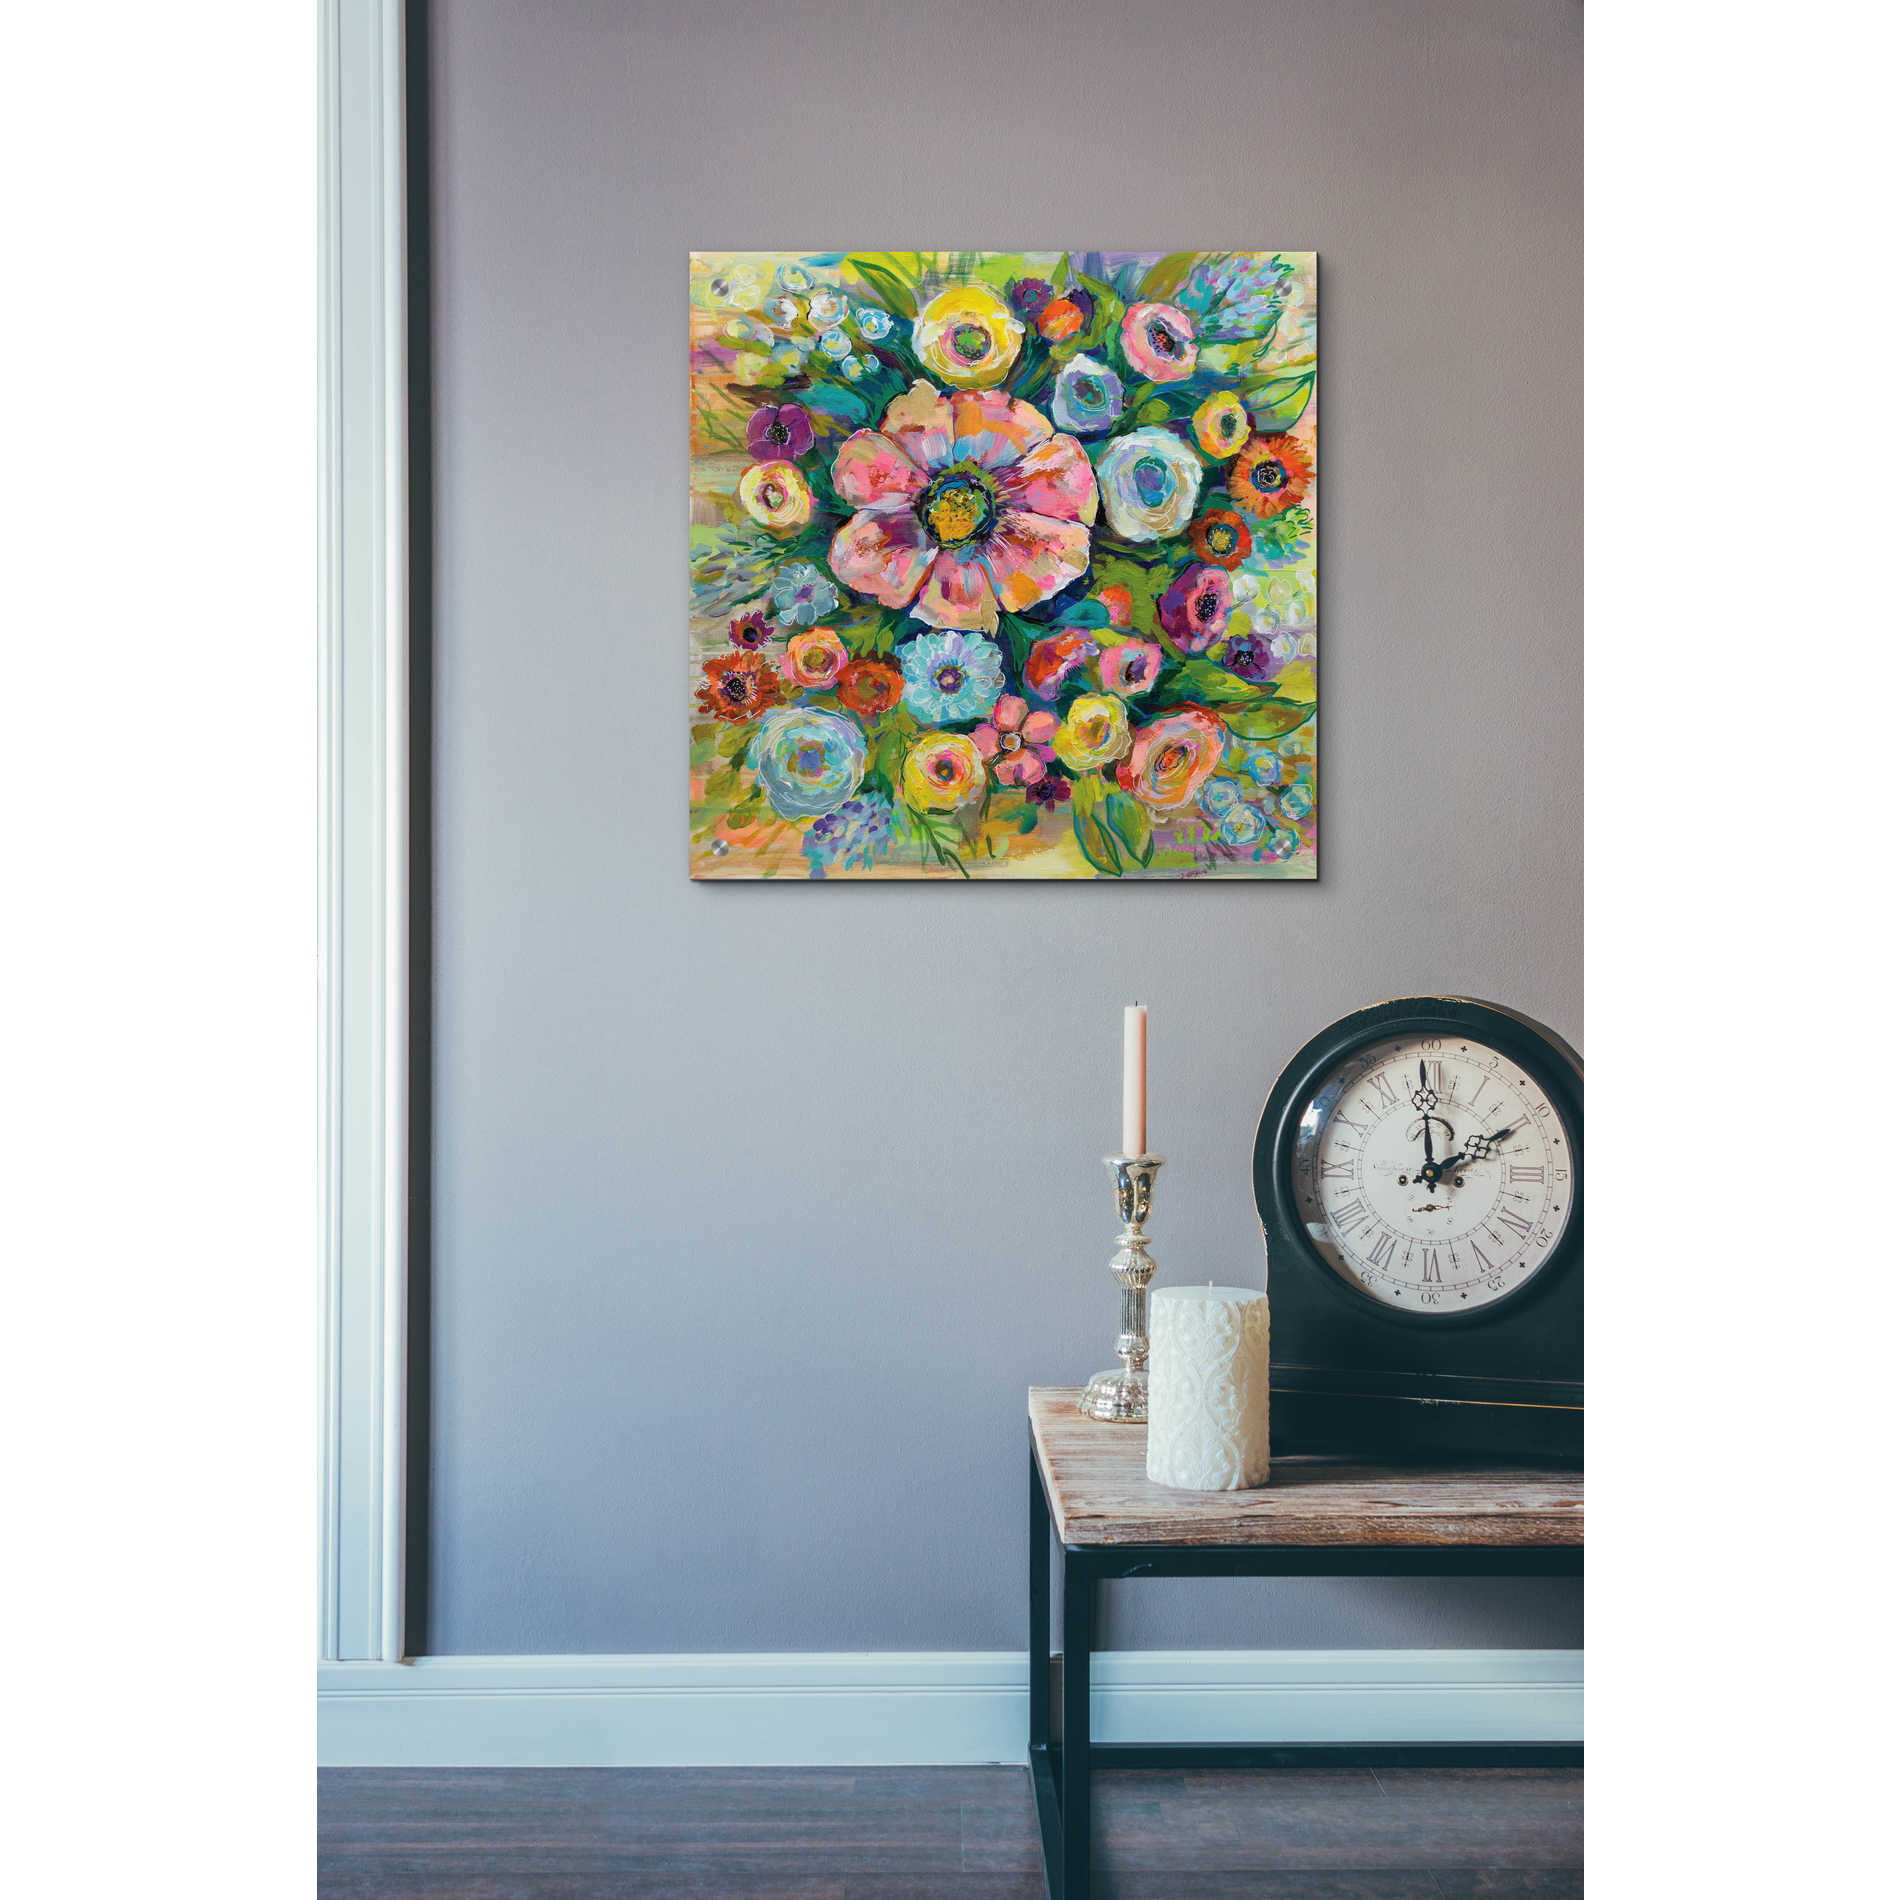 Epic Art 'Floral Fireworks' by Jeanette Vertentes, Acrylic Glass Wall Art,24x24